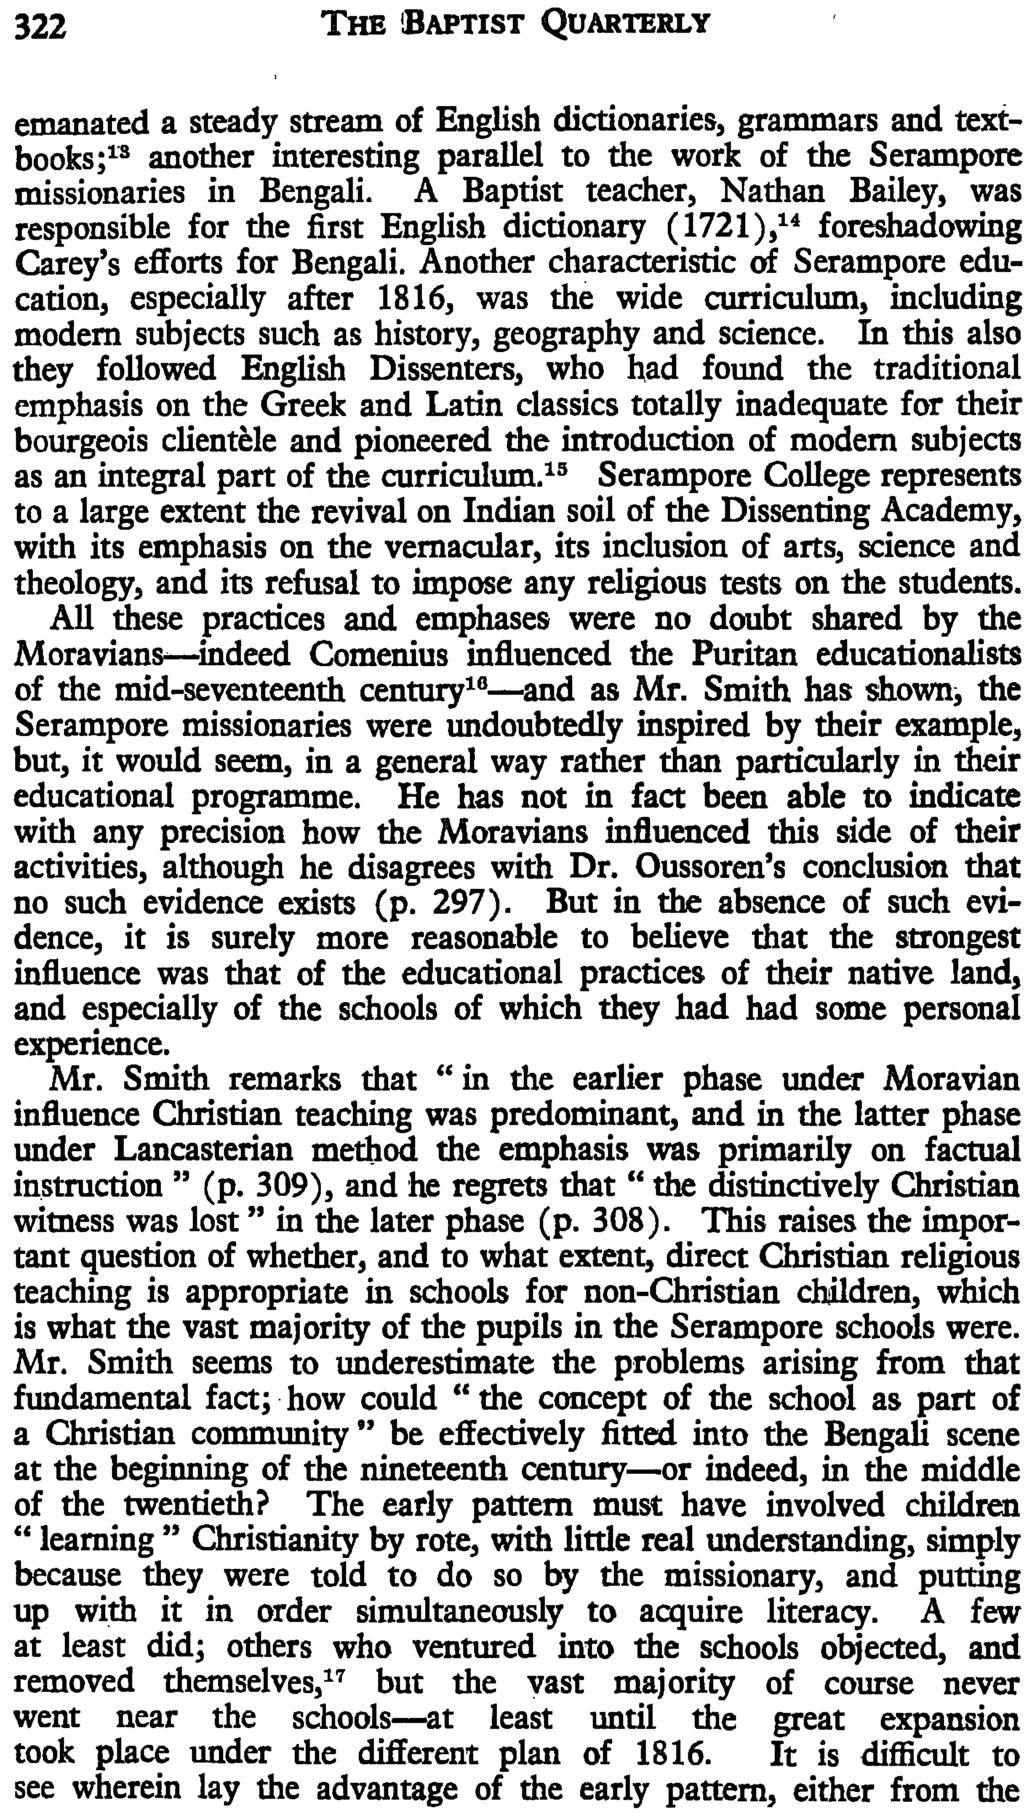 322 THE BAPTIST QUARTERLY emanated a steady stream of English dictionaries, grammars imd textbooks;:rs another interesting parallel to the work of the Serampore missionaries in Bengali.